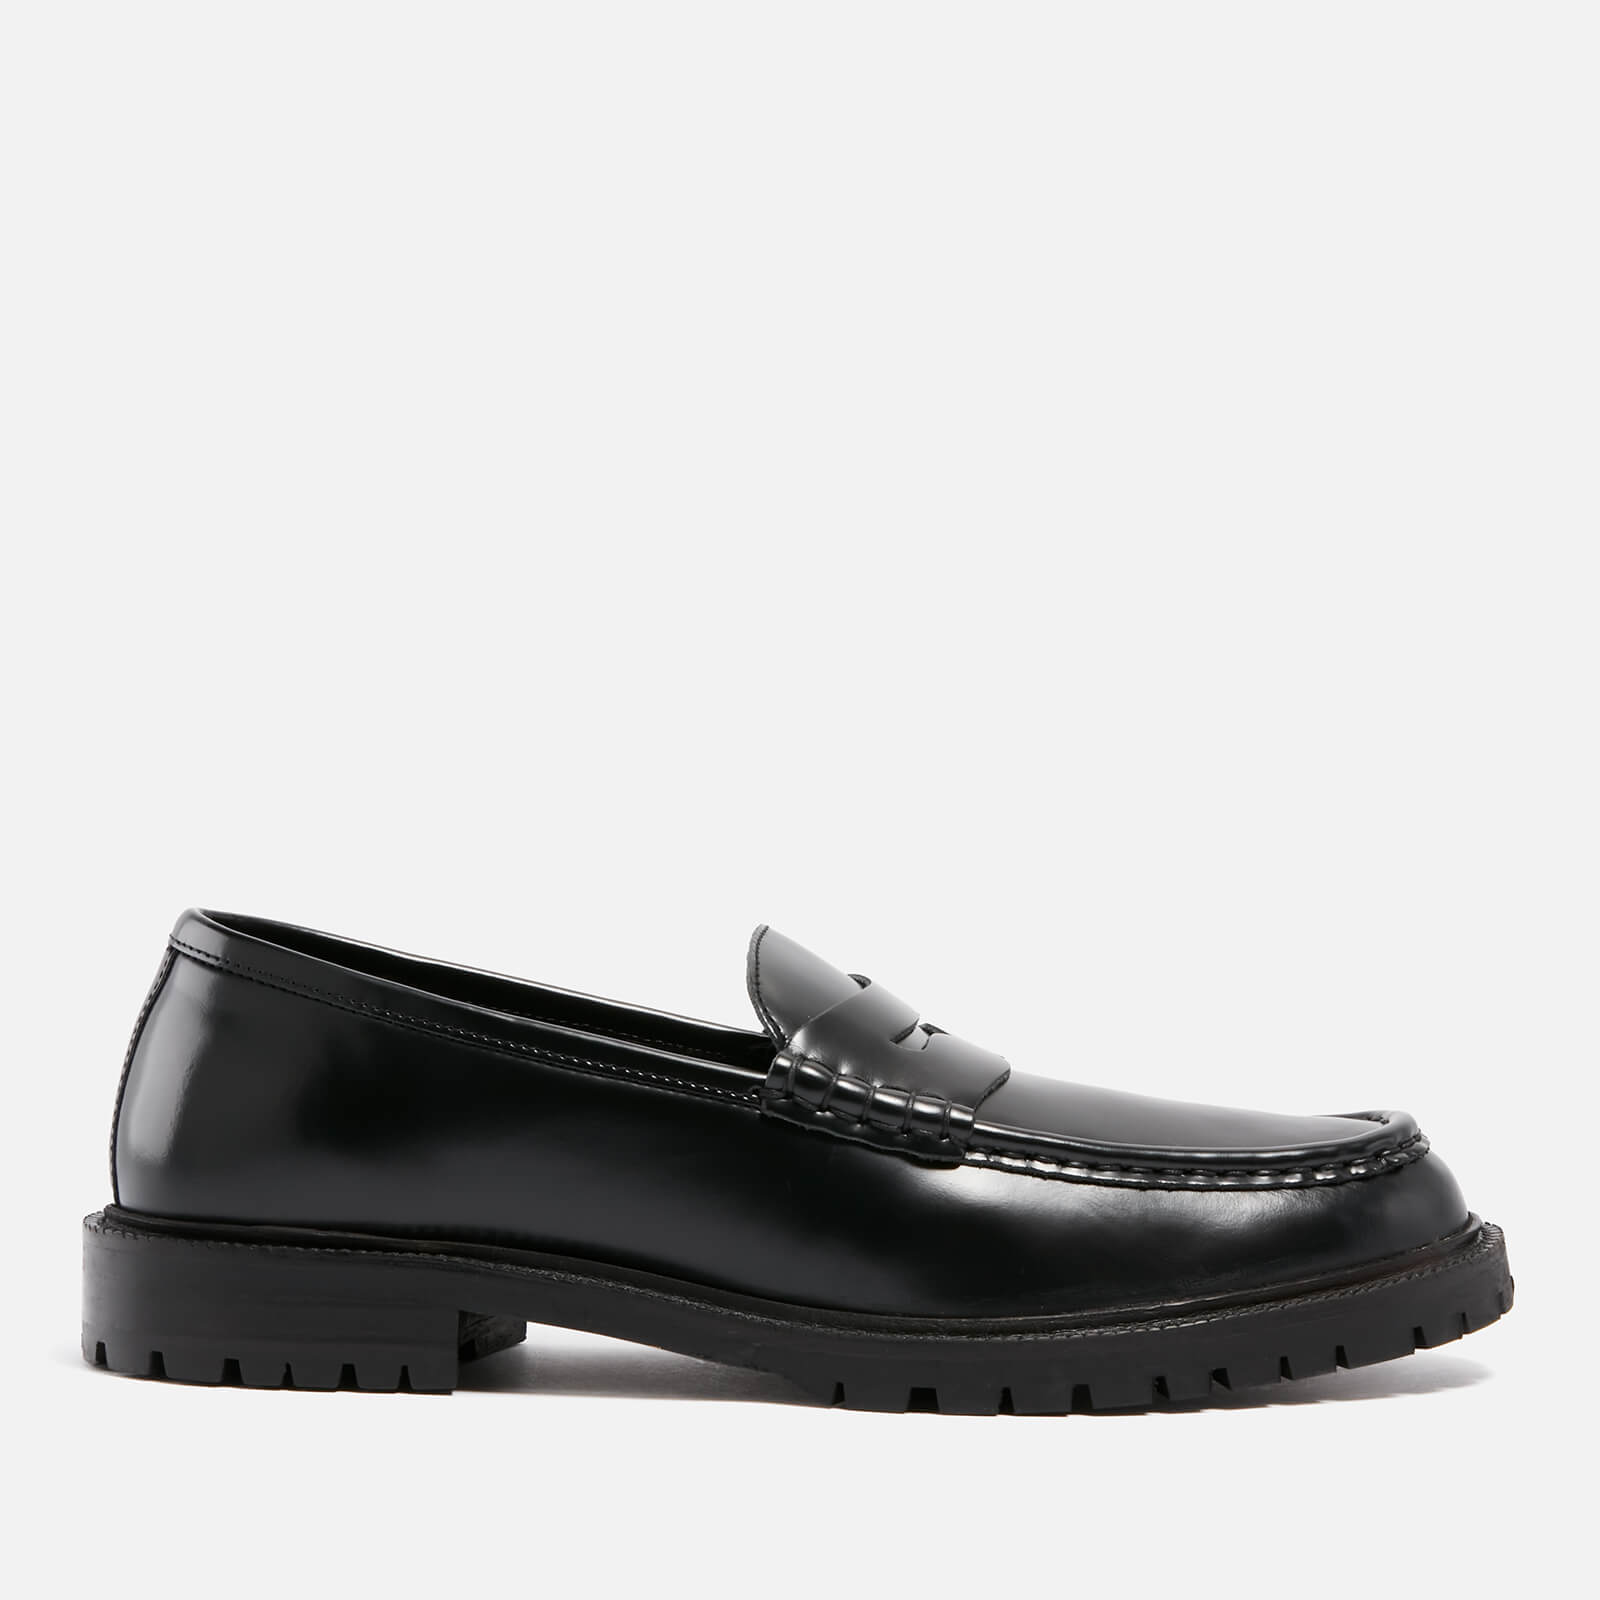 Walk London Men’s Campus Leather Saddle Loafers